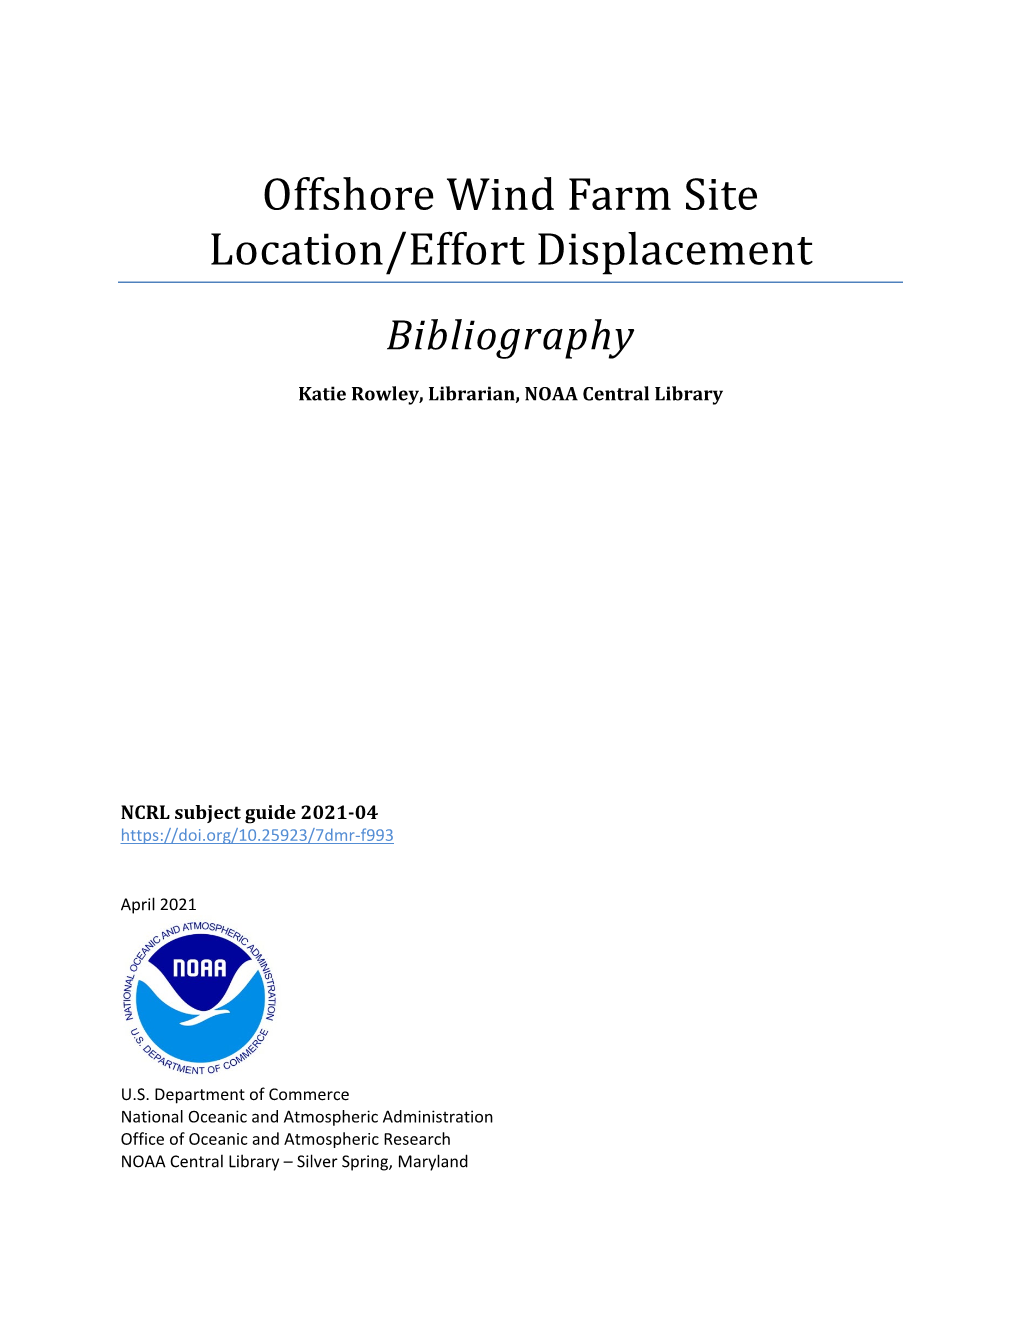 Offshore Wind Farm Site Location/Effort Displacement Bibliography